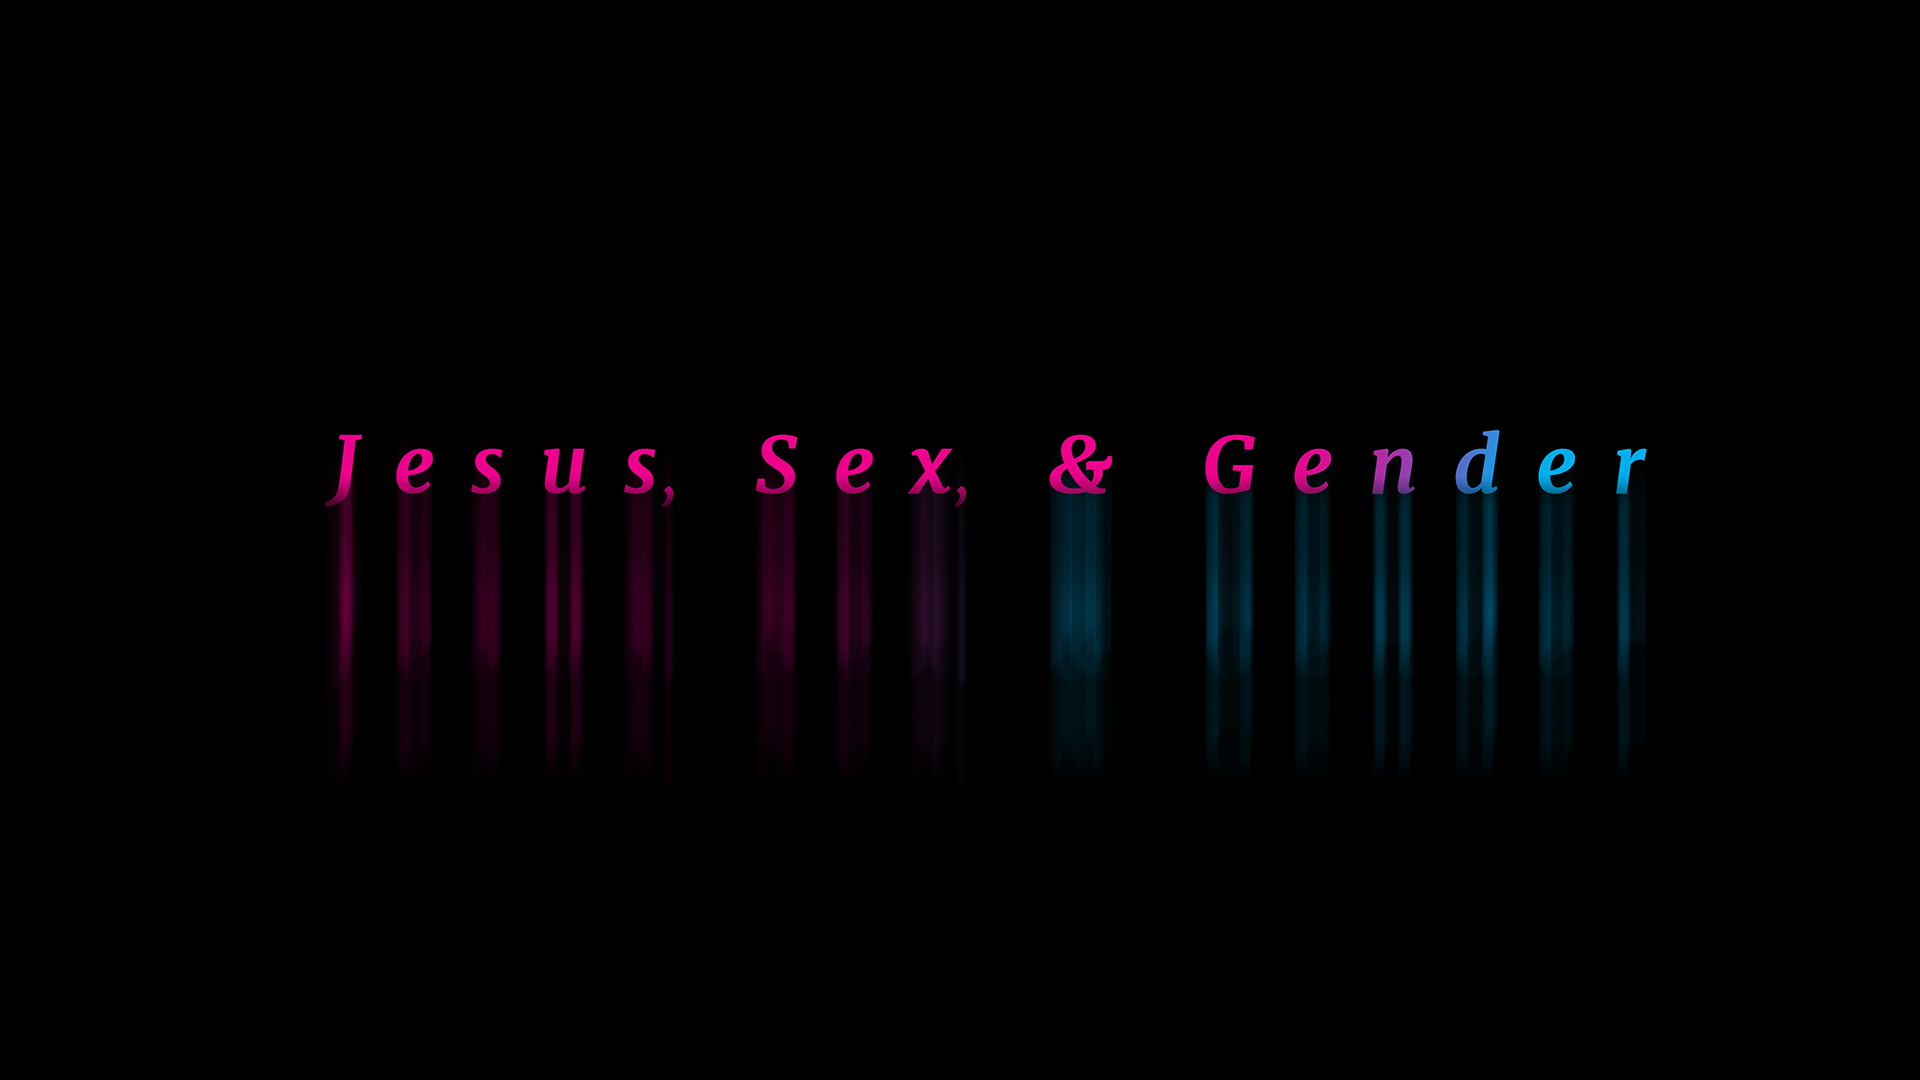 What is Sexuality's Purpose?